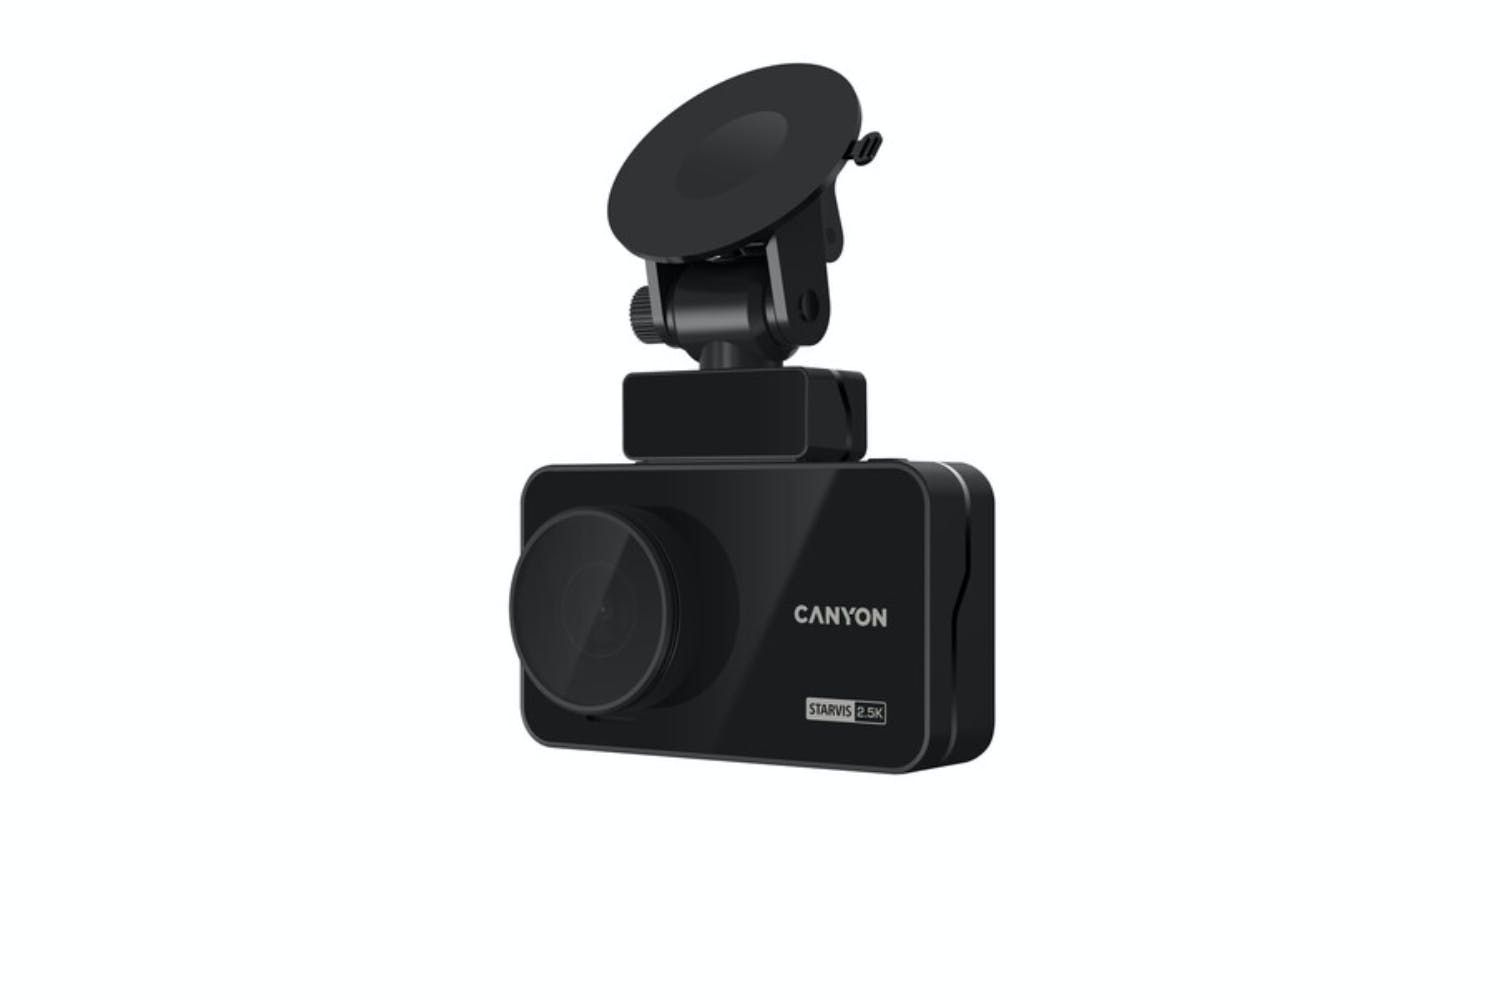 Canyon RoadRunner CDVR-25GPS, 3.0'' IPS (640x360), touch screen, WQHD 2.5K 2560x1440@60fps, NTK96670, 5 MP CMOS Sony Starvis IMX335 image sensor, 5 MP camera, 140° Viewing Angle, Wi-Fi, GPS, Video camera database, USB Type-C, Supercapacitor_2